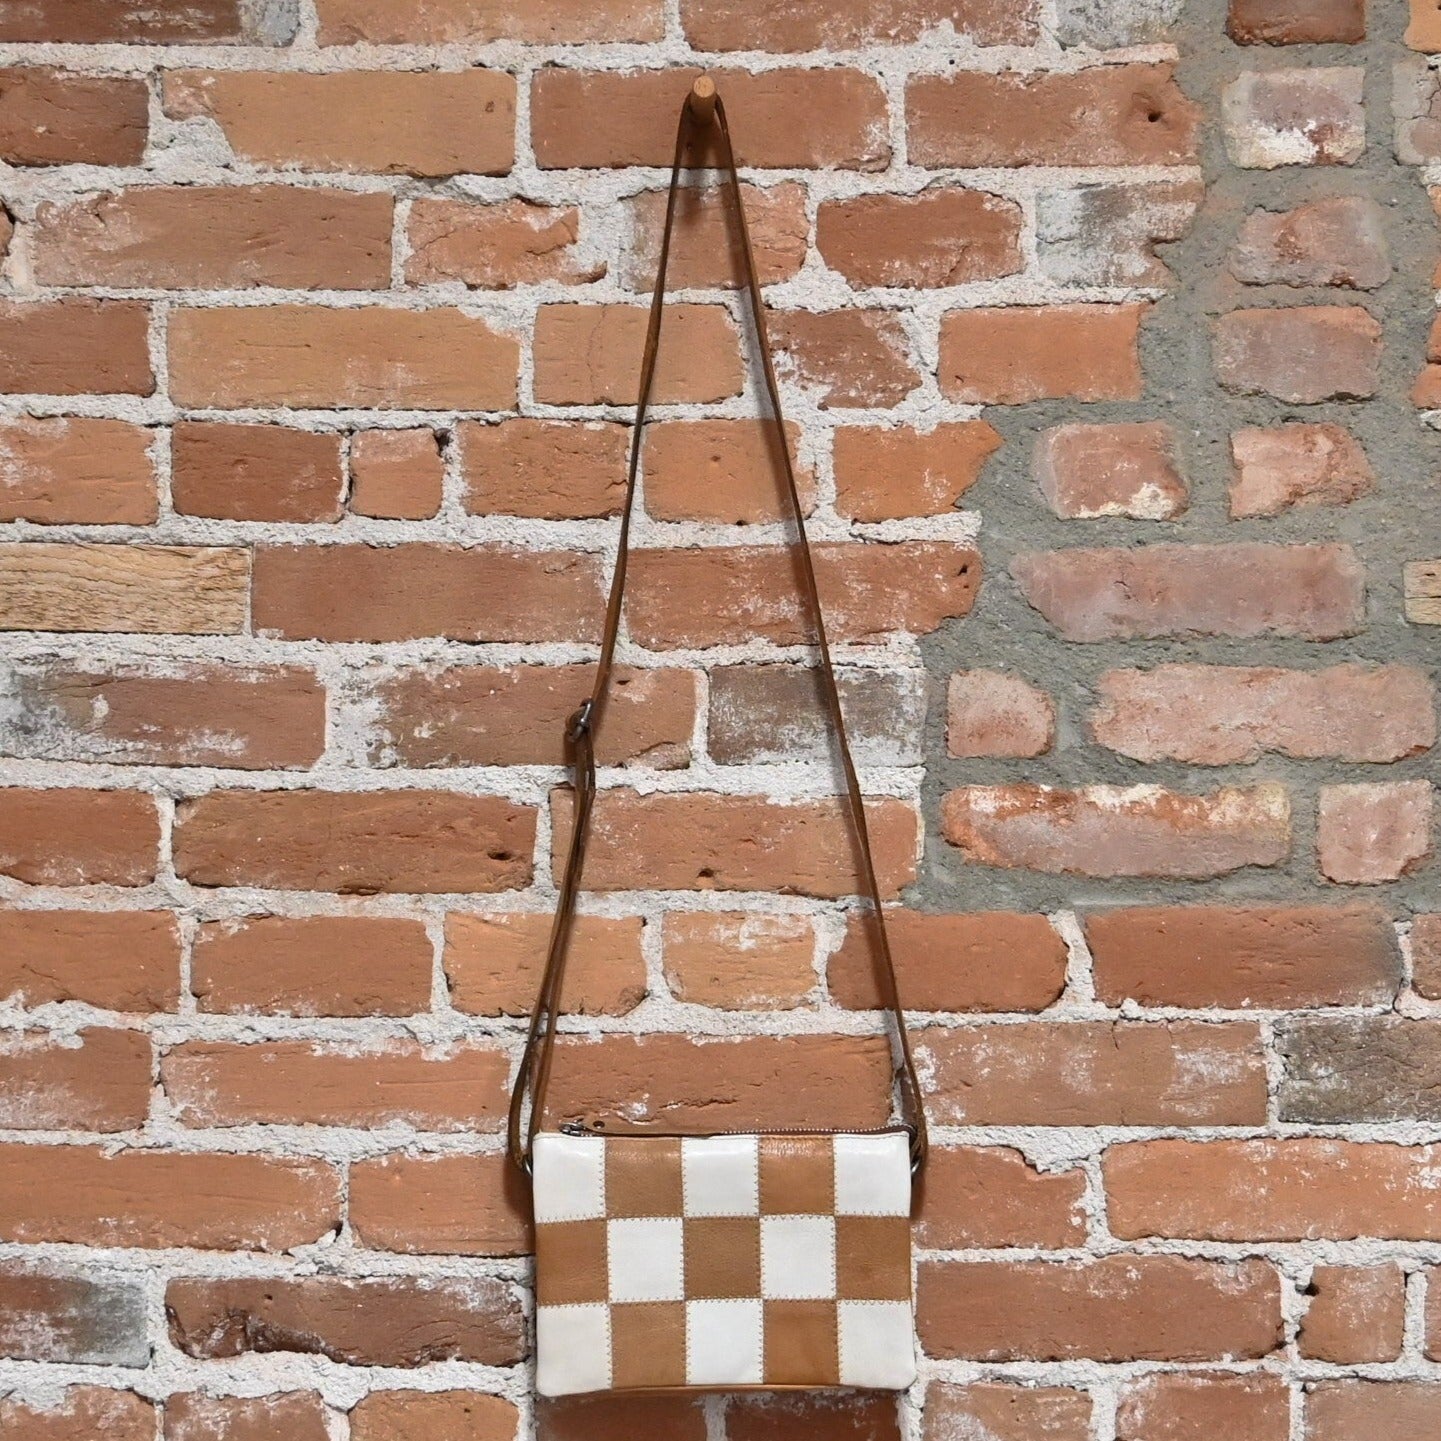 Latico Sadie Crossbody in Oat Patchwork view of bag hanging